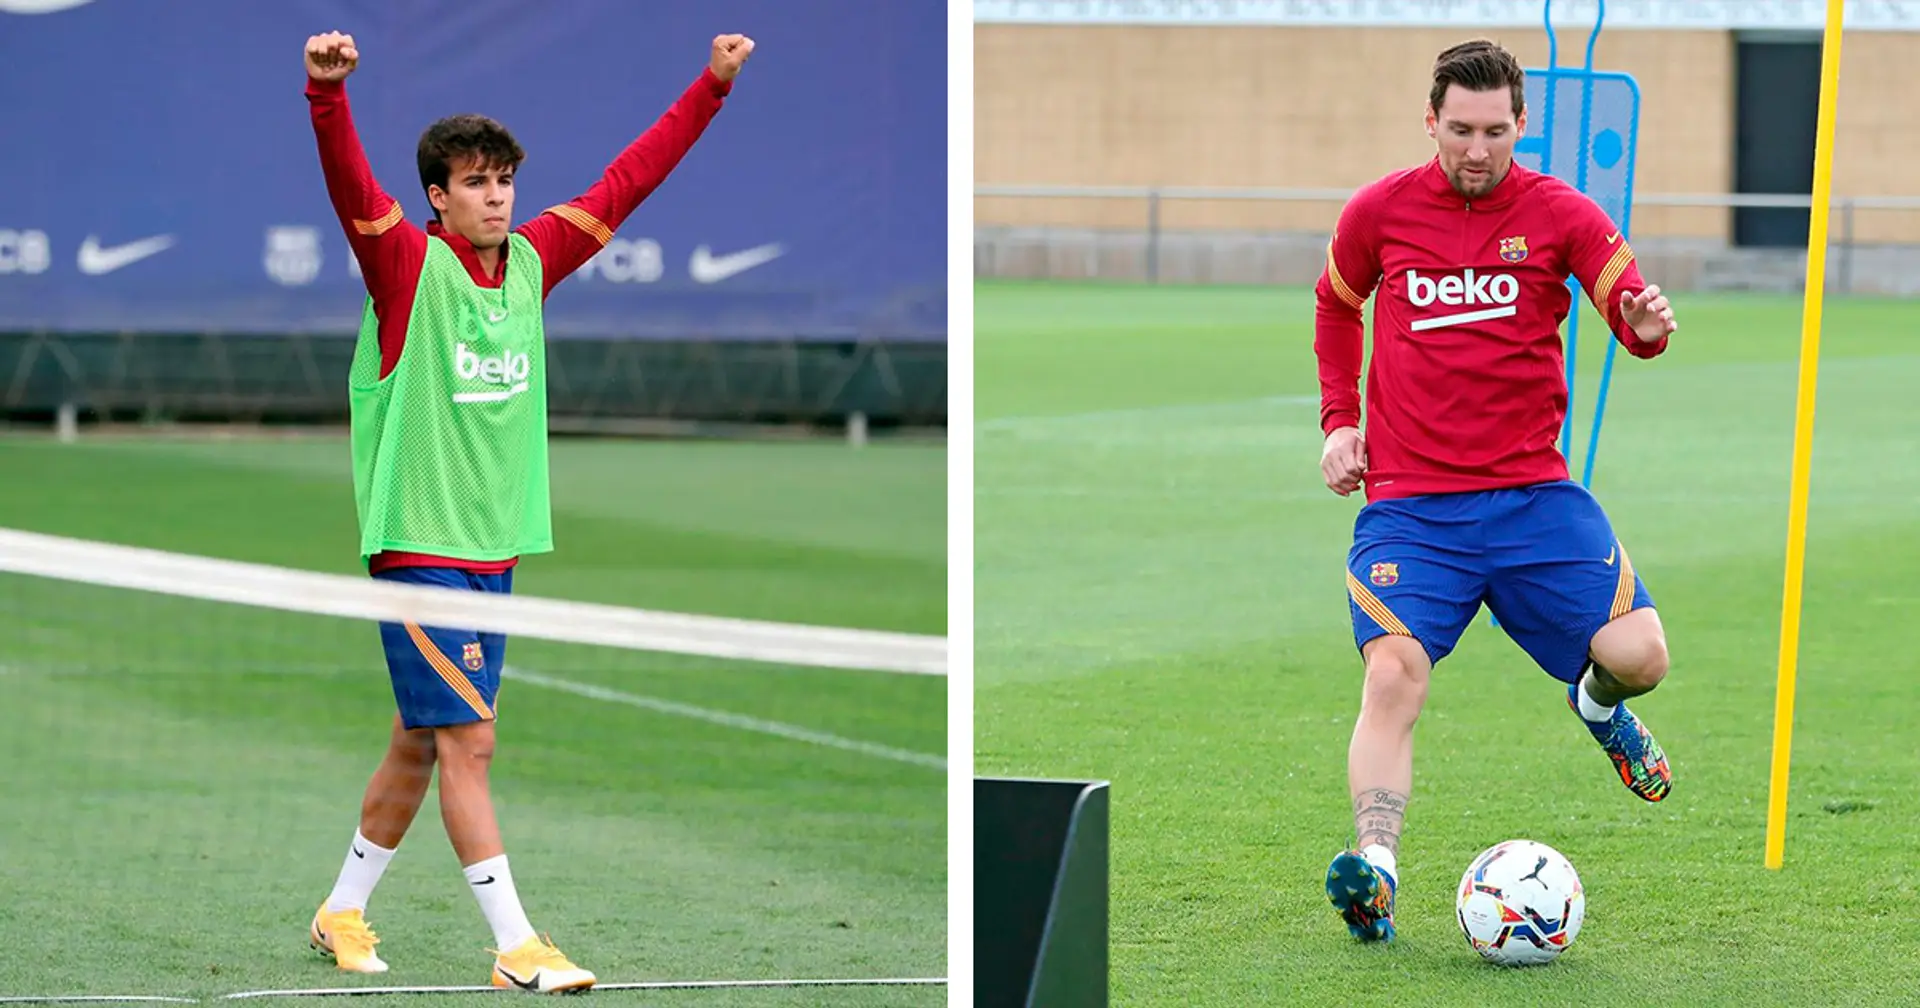 Footvolley, Messi firing on target and more: 8 best pics from Tuesday's training session